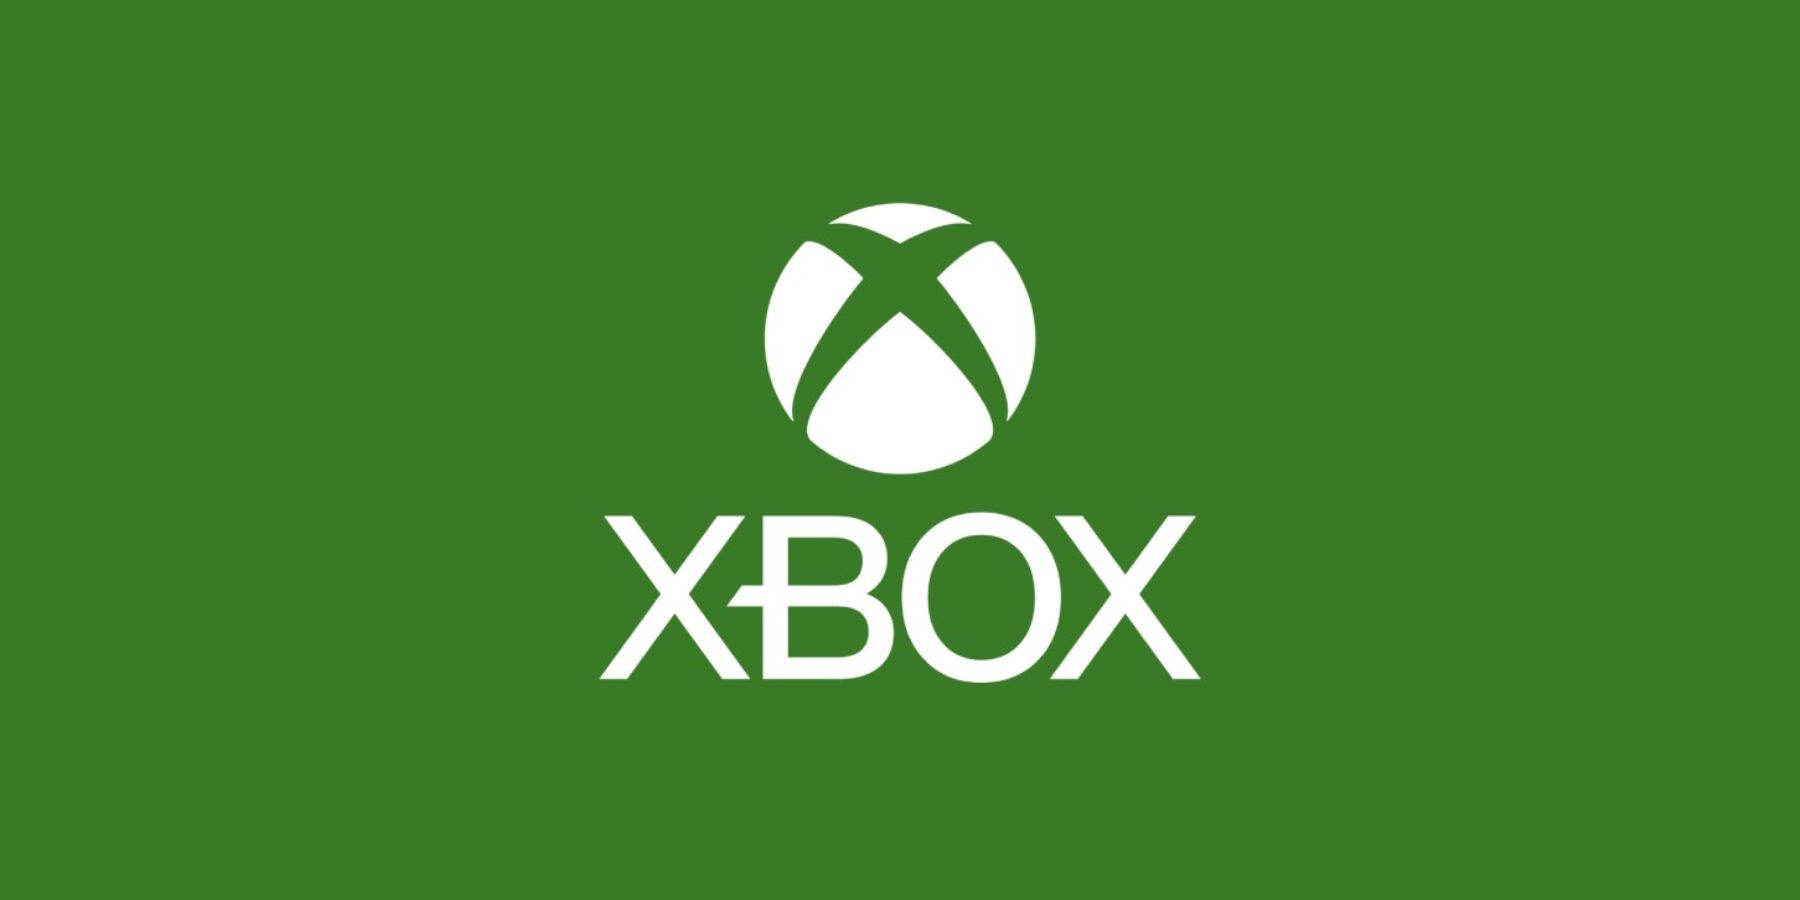 xbox-simple-logo-green-background